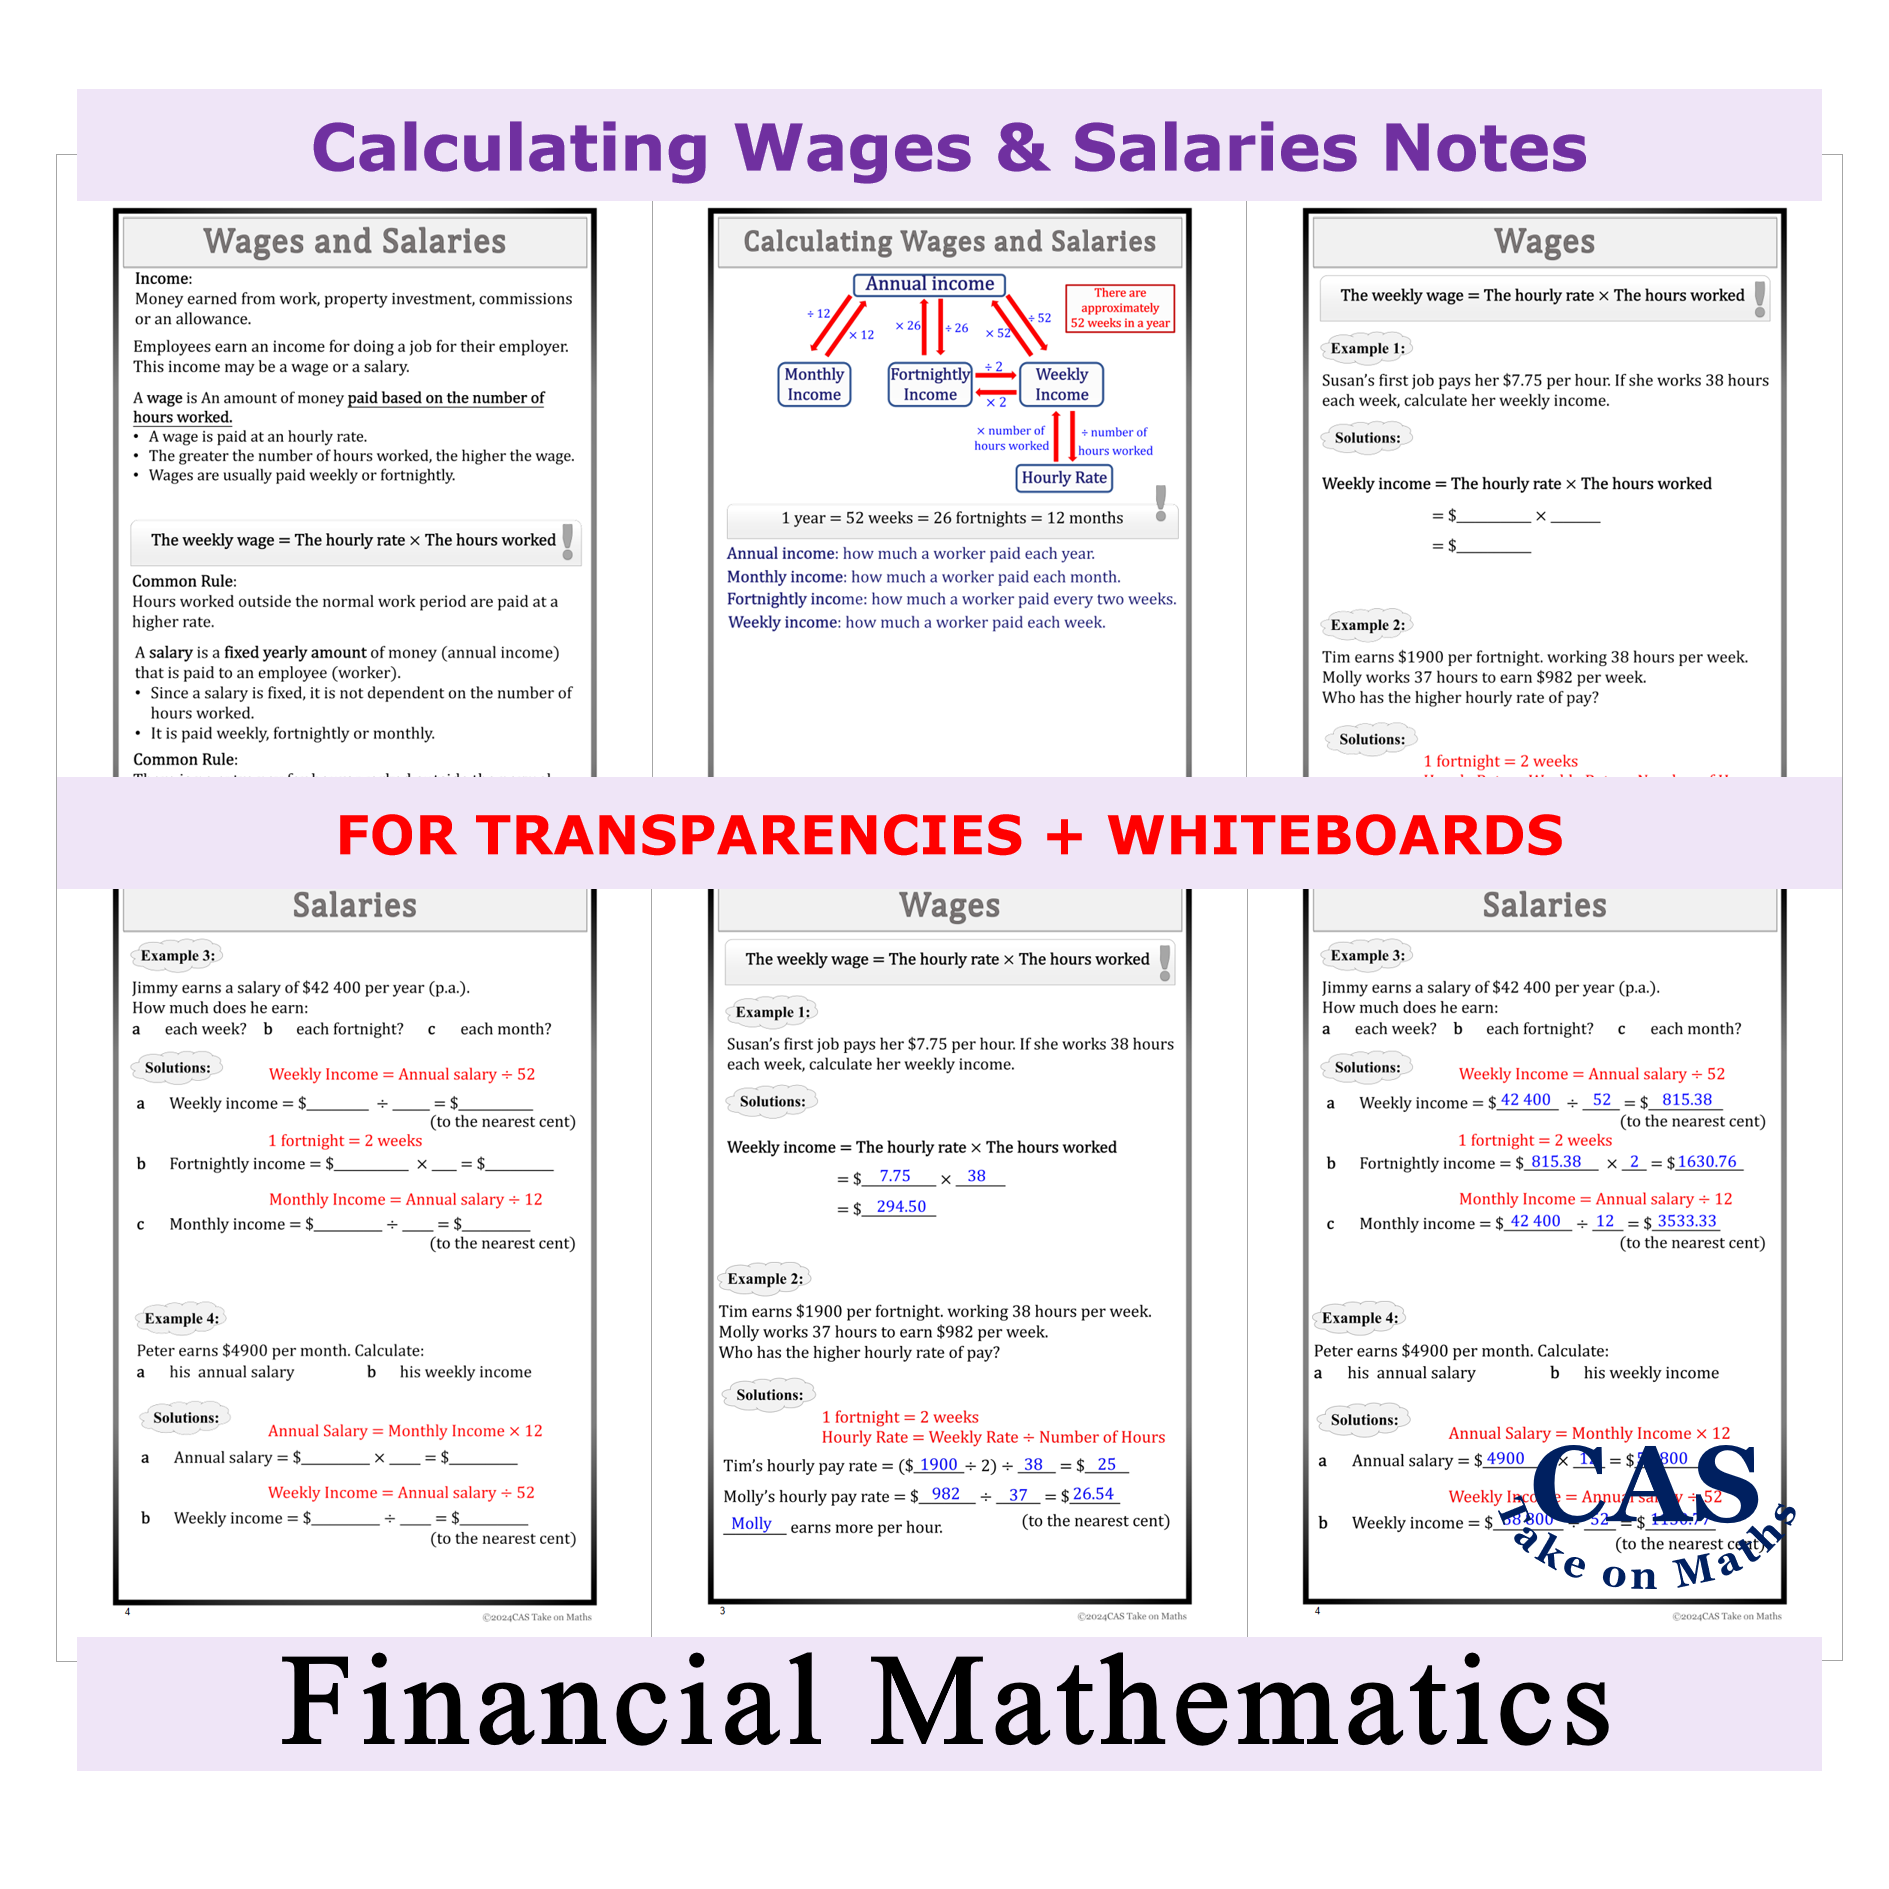 Financial Maths - Calculating Wages and Salaries Workbook - Financial ...